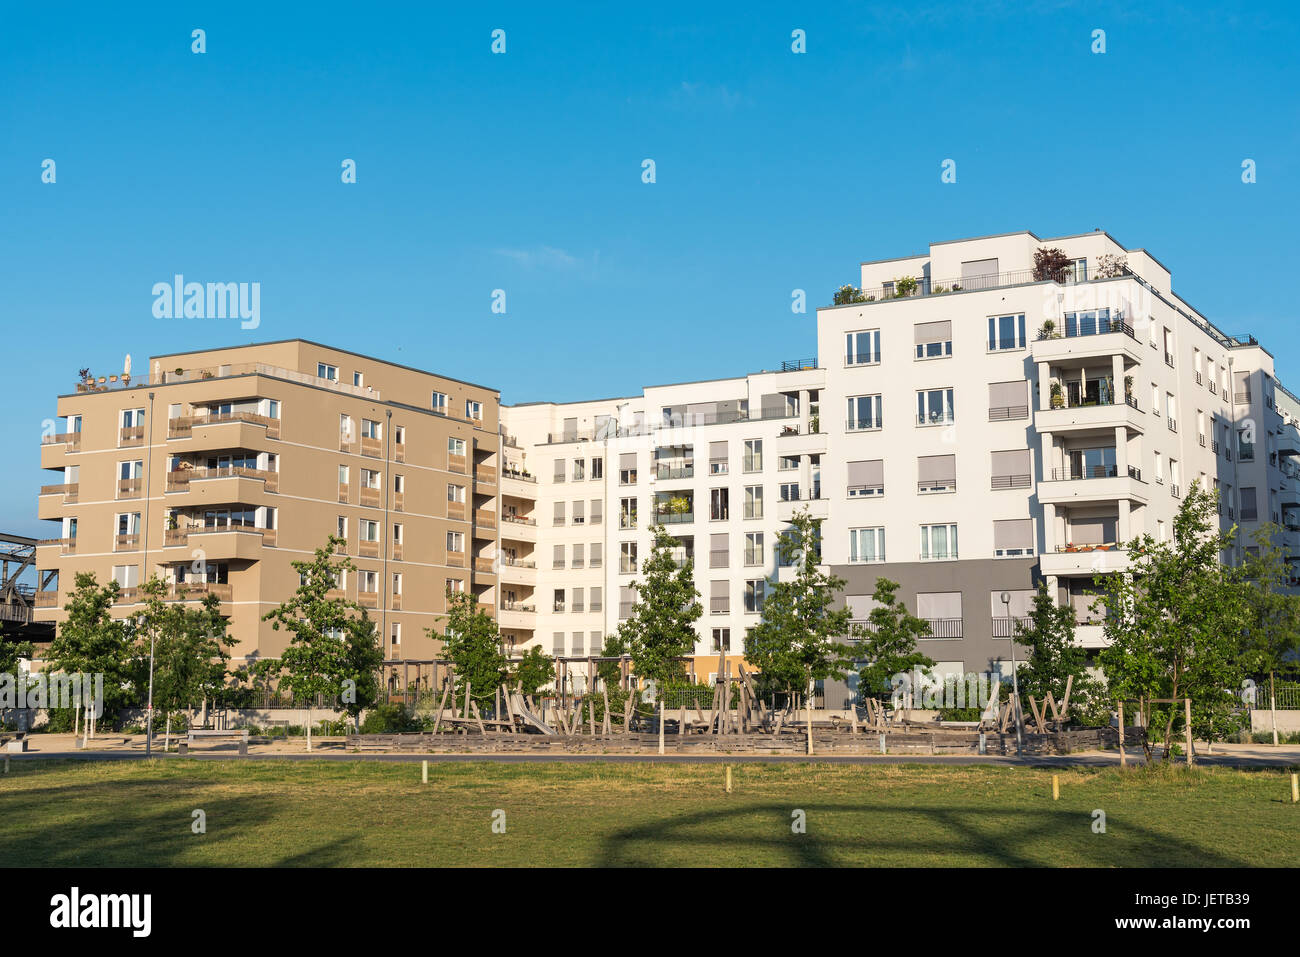 Development area with modern multi-family houses seen in Berlin, Germany Stock Photo